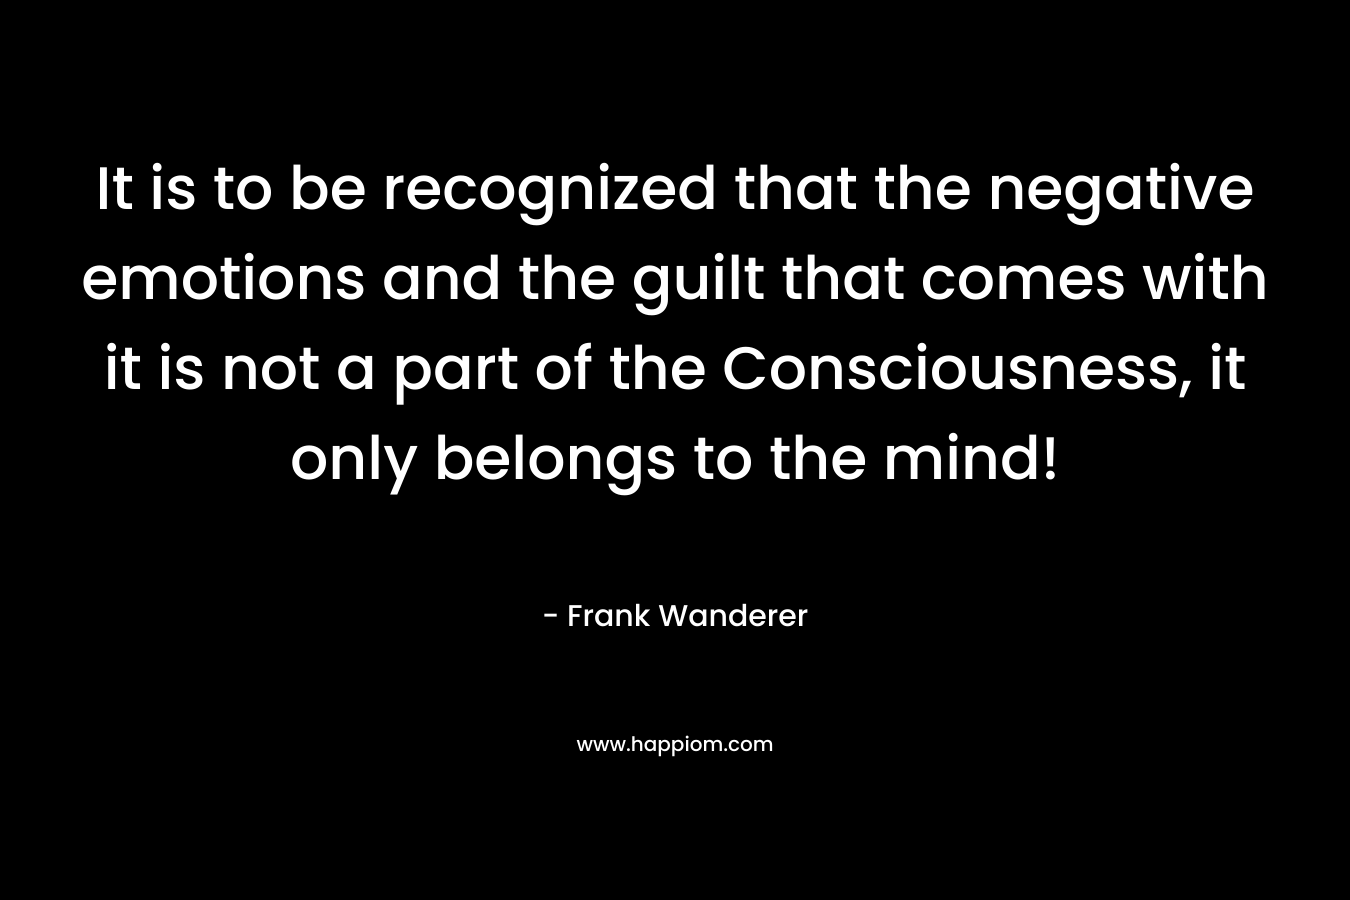 It is to be recognized that the negative emotions and the guilt that comes with it is not a part of the Consciousness, it only belongs to the mind!